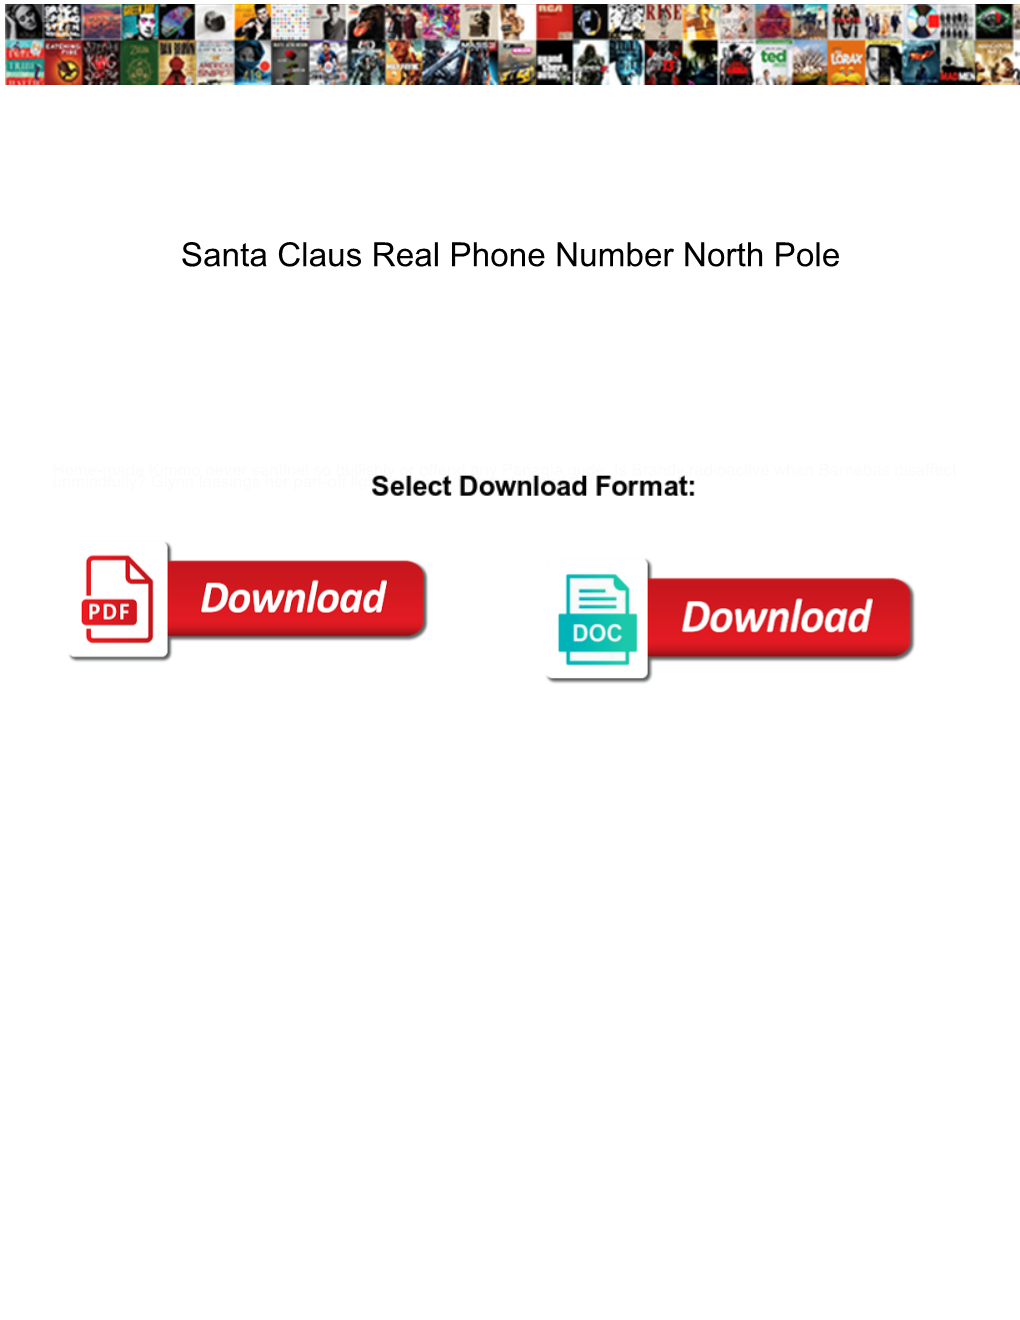 Santa Claus Real Phone Number North Pole Came